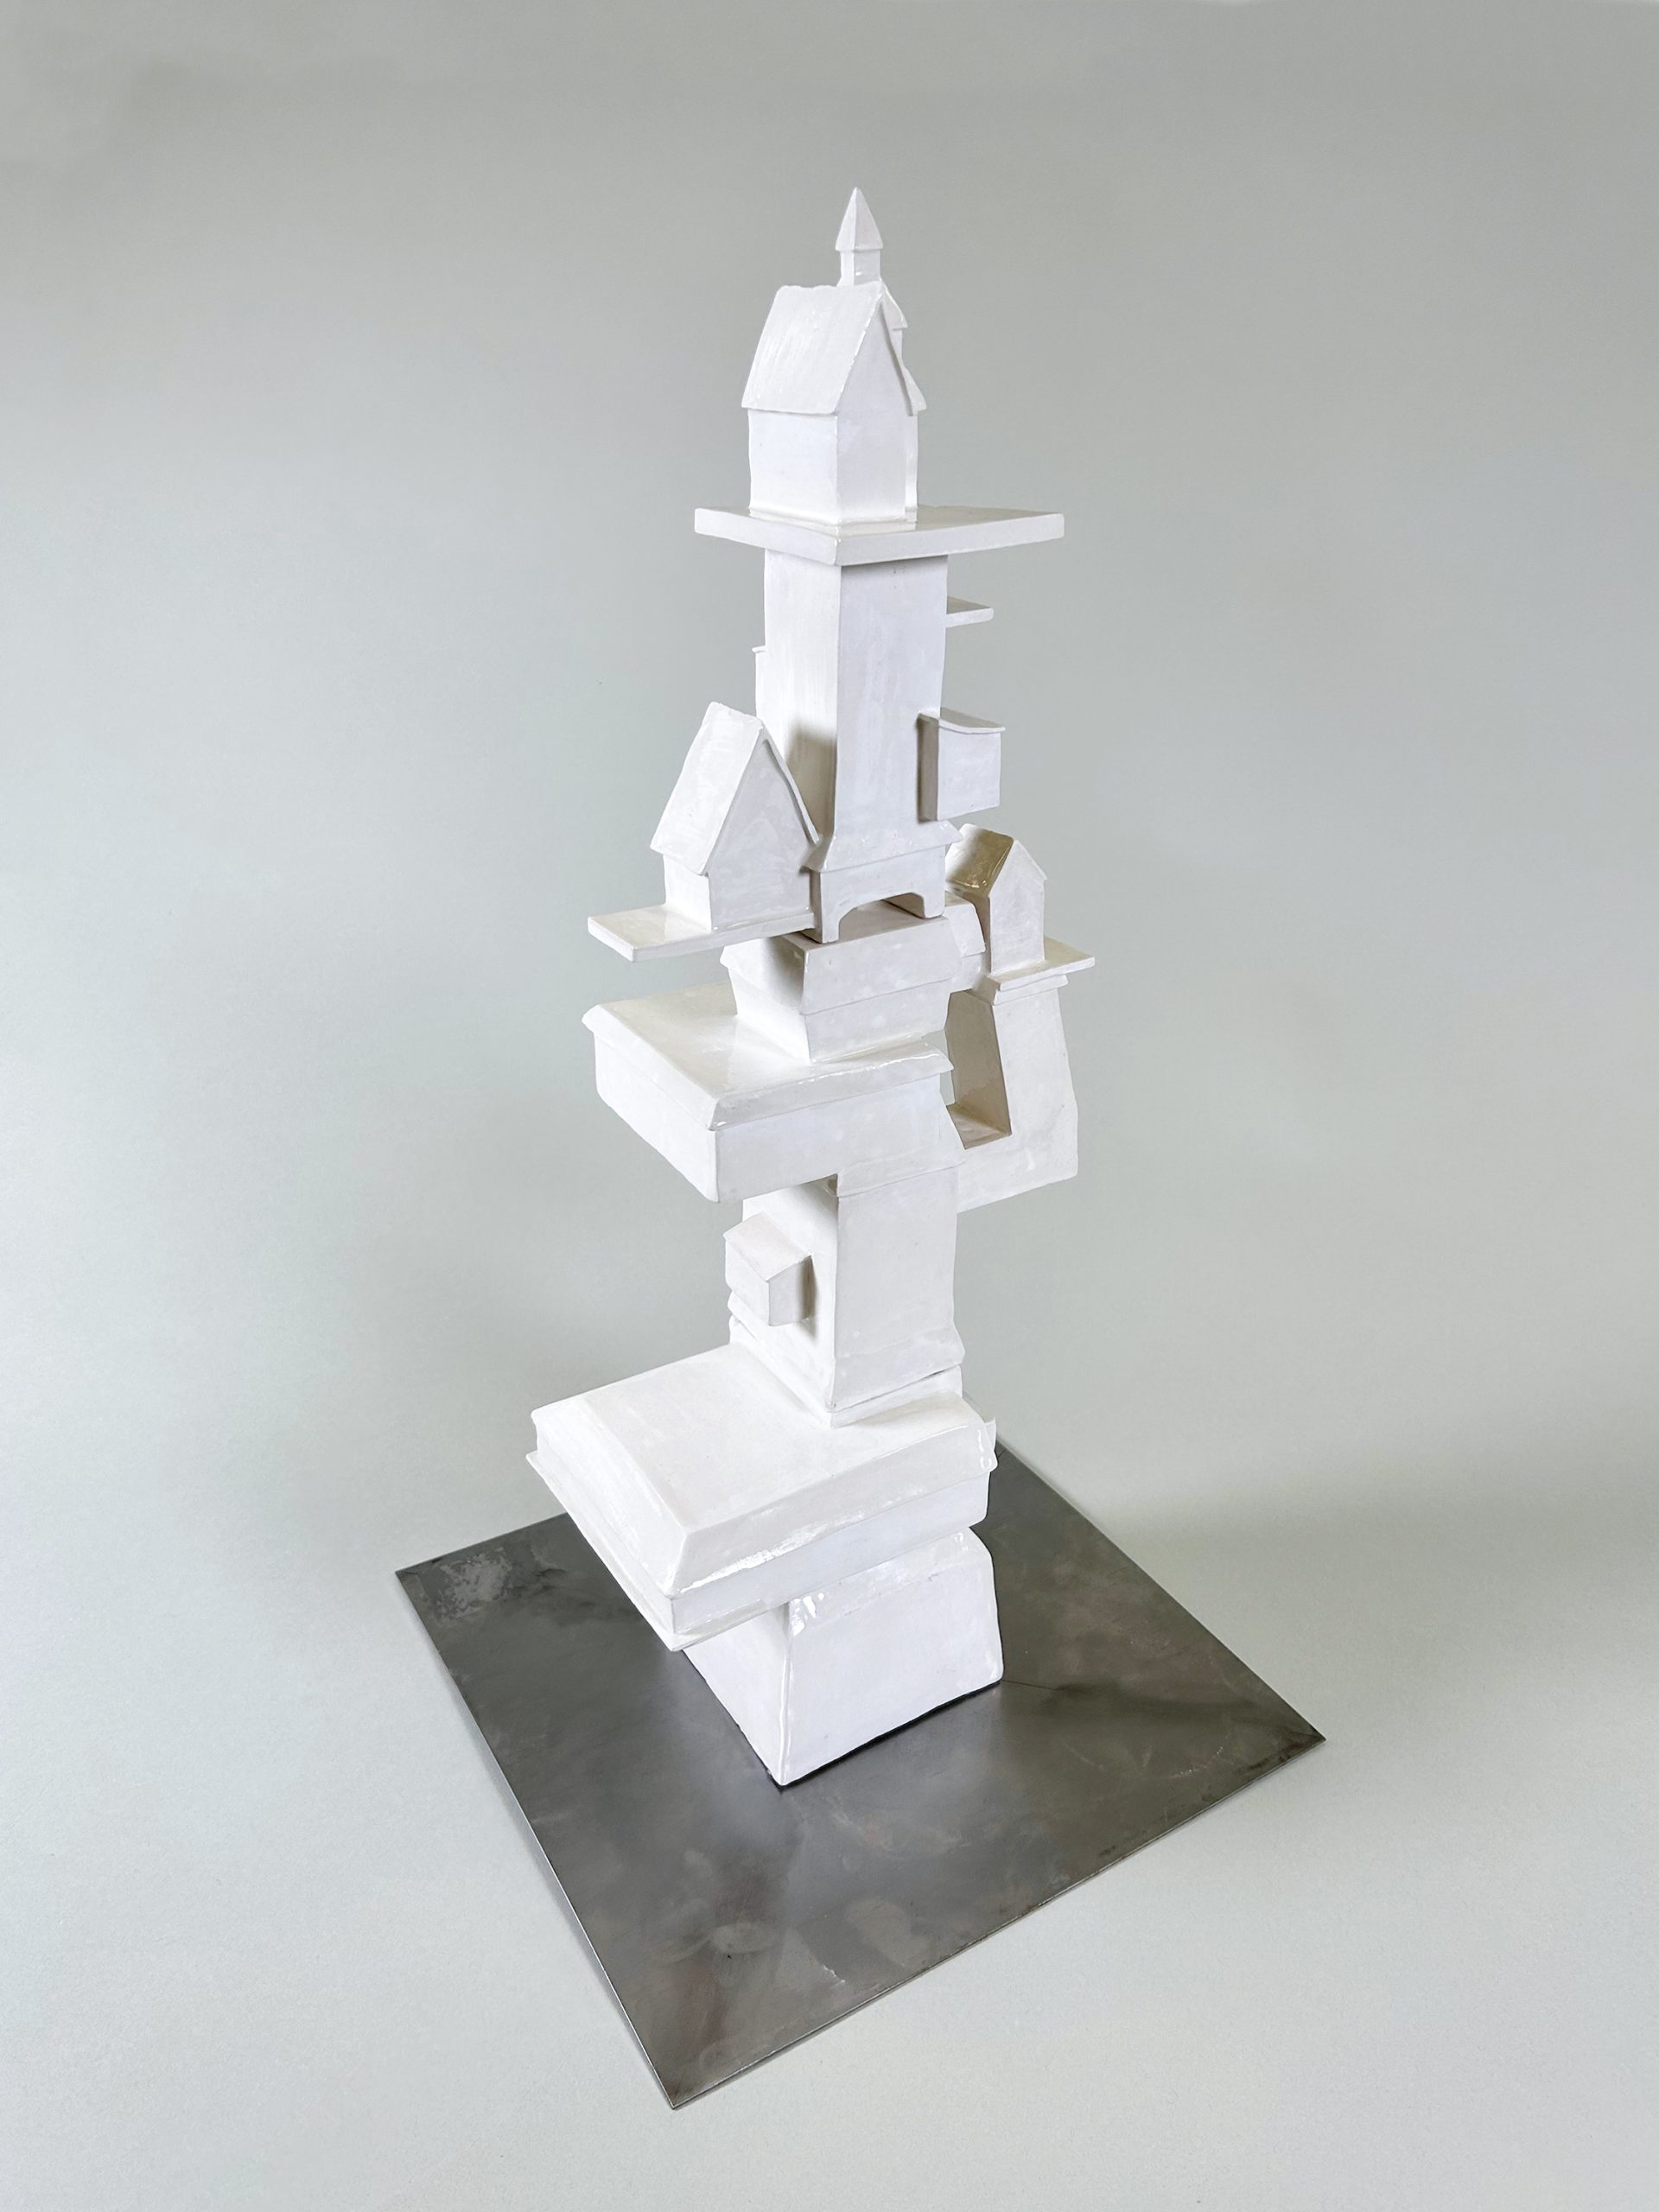 A 2-foot tall white, ceramic tower standing at a 3-quarters angle. It has a 1-foot-wide block as a foundation and becomes narrower as it approaches the top. It is topped with a house-like structure with a triangular roof. The tower has three structures that come out on the sides, attached diagonally on the opposite side of the tower. The bottom-most addition is a flat box. the middle-most is a perpendicular arm that upholds a small house-like building. Not far above is a medium-sized house-like structure on a thin base. the artist says. "